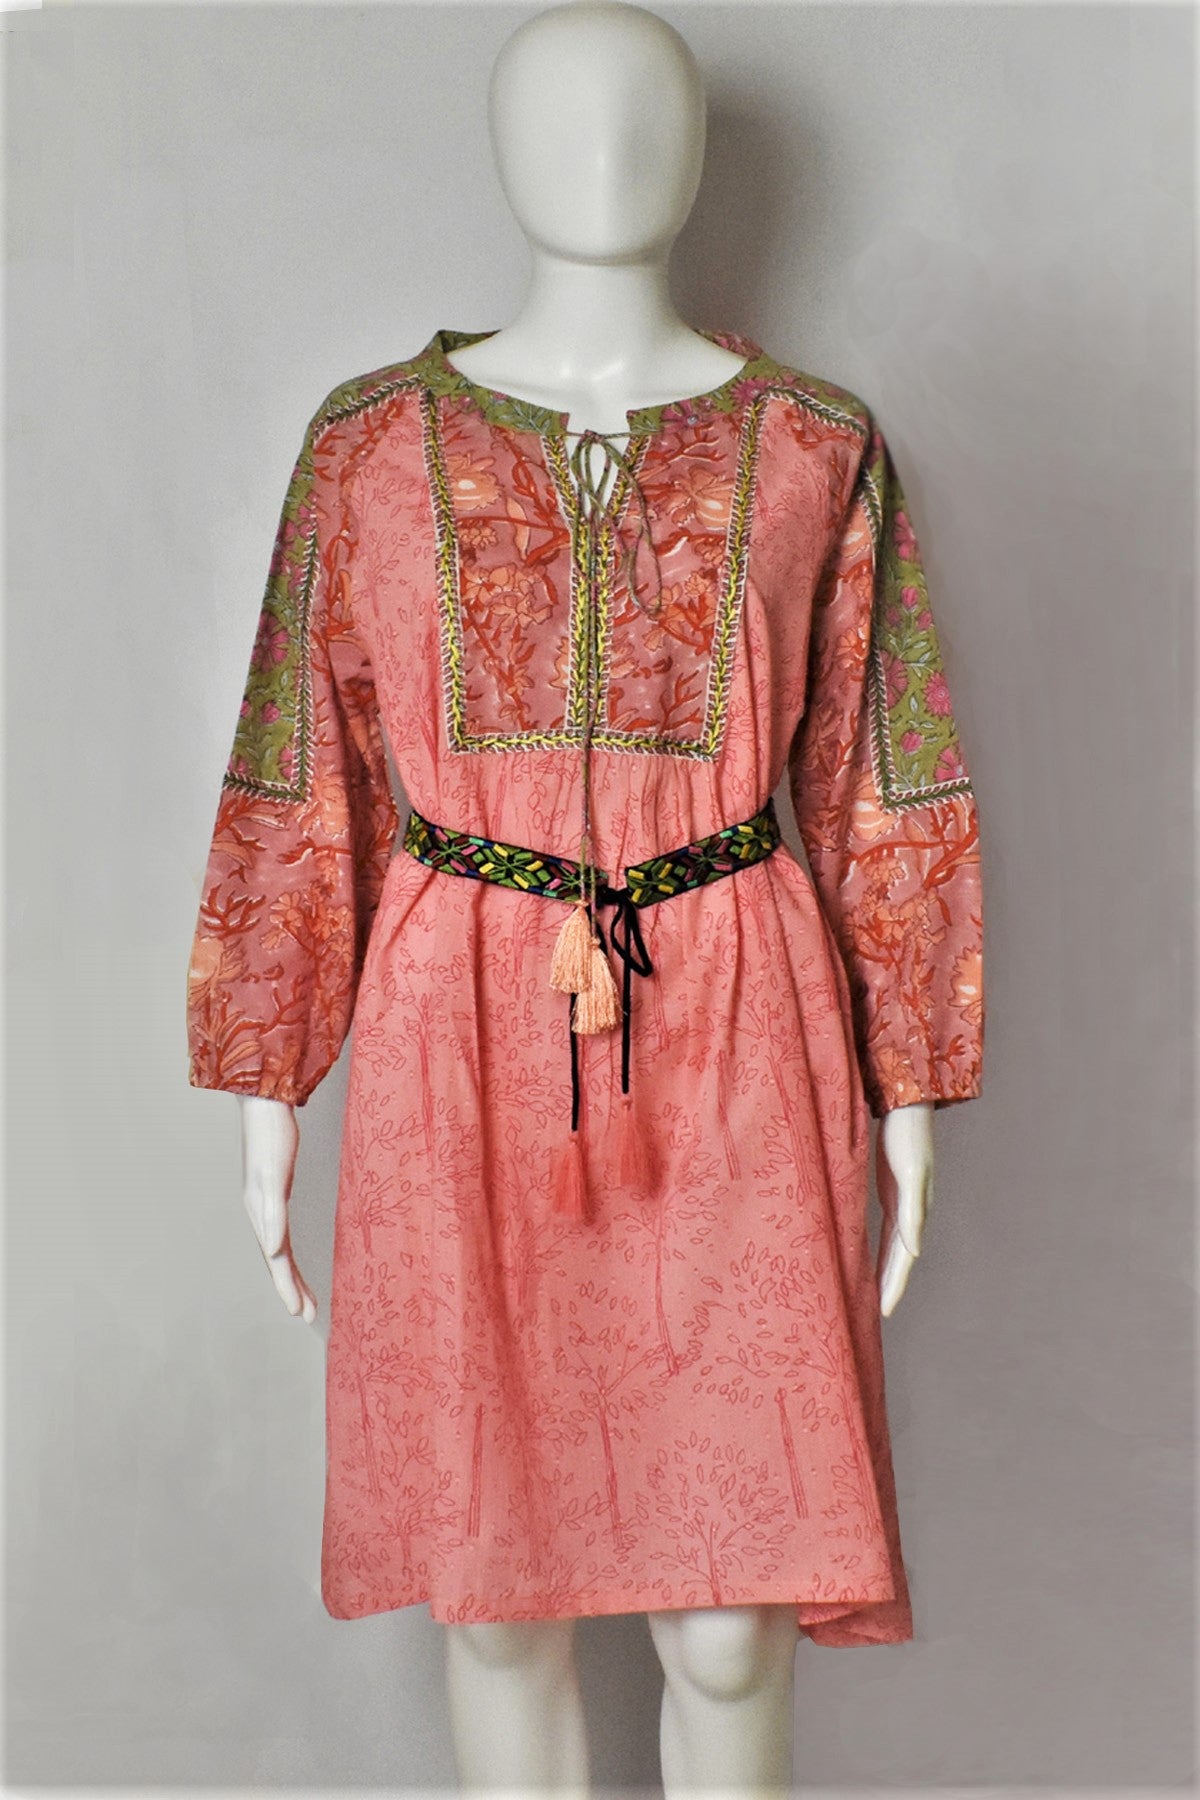 MEADOW FLORAL PATCHWORK DRESS - Peach /Pink colorway- woodblock prints that scream summer come together in this light cotton dress that looks awesome in this image. Touch of hand embroidery detail in bright yellow looks great on peachy pink, red and brown print colours.  paired with luda belt